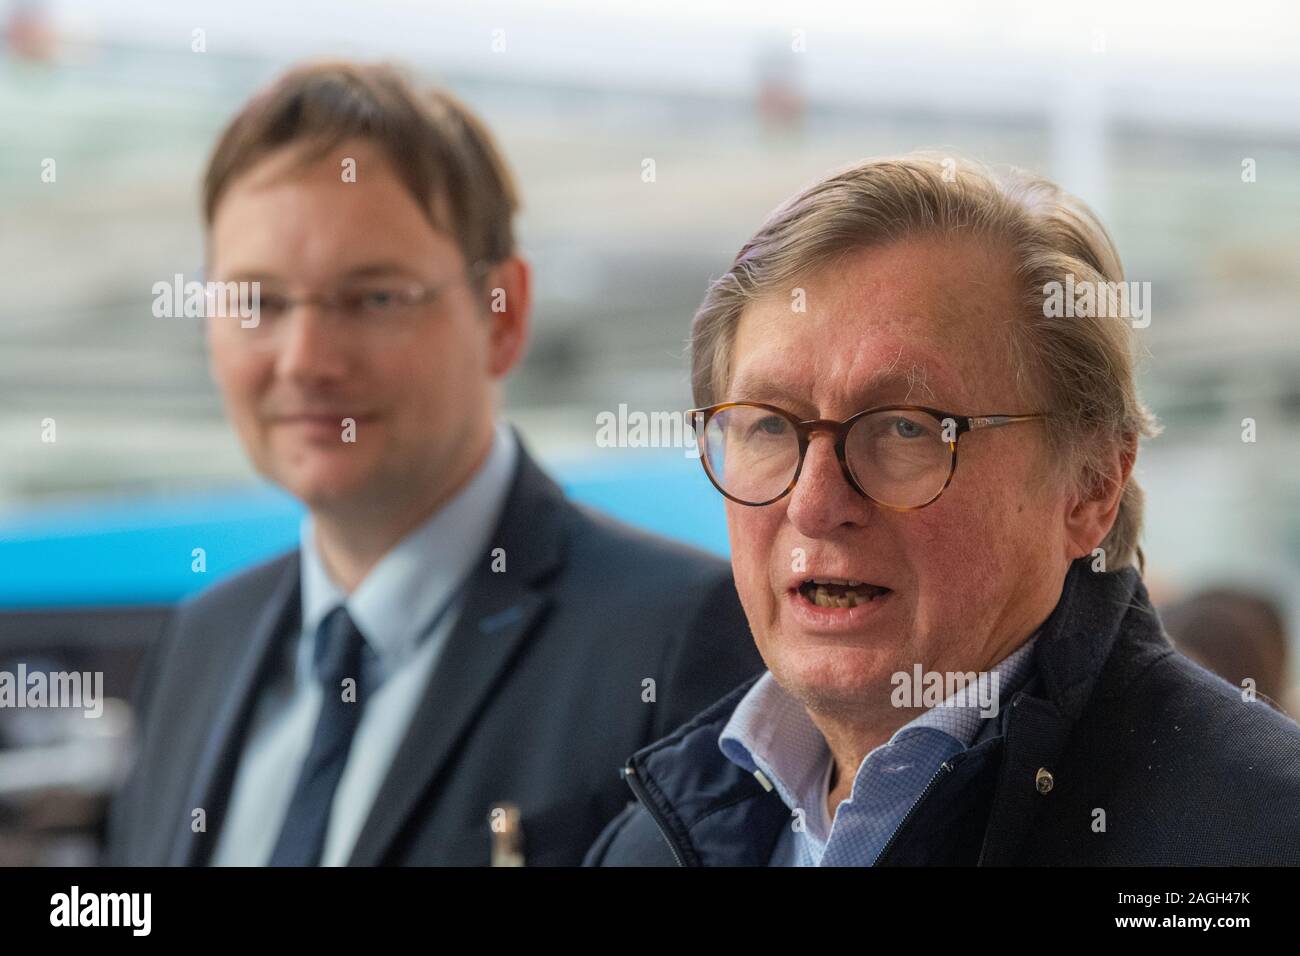 Munich, Germany. 19th Dec, 2019. Hans Reichhart (l, CSU), Minister of Transport of Bavaria, and Michael Kerkloh, Munich Airport CEO, attend the press conference. Transportation Minister Reichhart, (CSU) announced the first test results of the newly installed safety system in a press conference. Credit: Lino Mirgeler/dpa/Alamy Live News Stock Photo